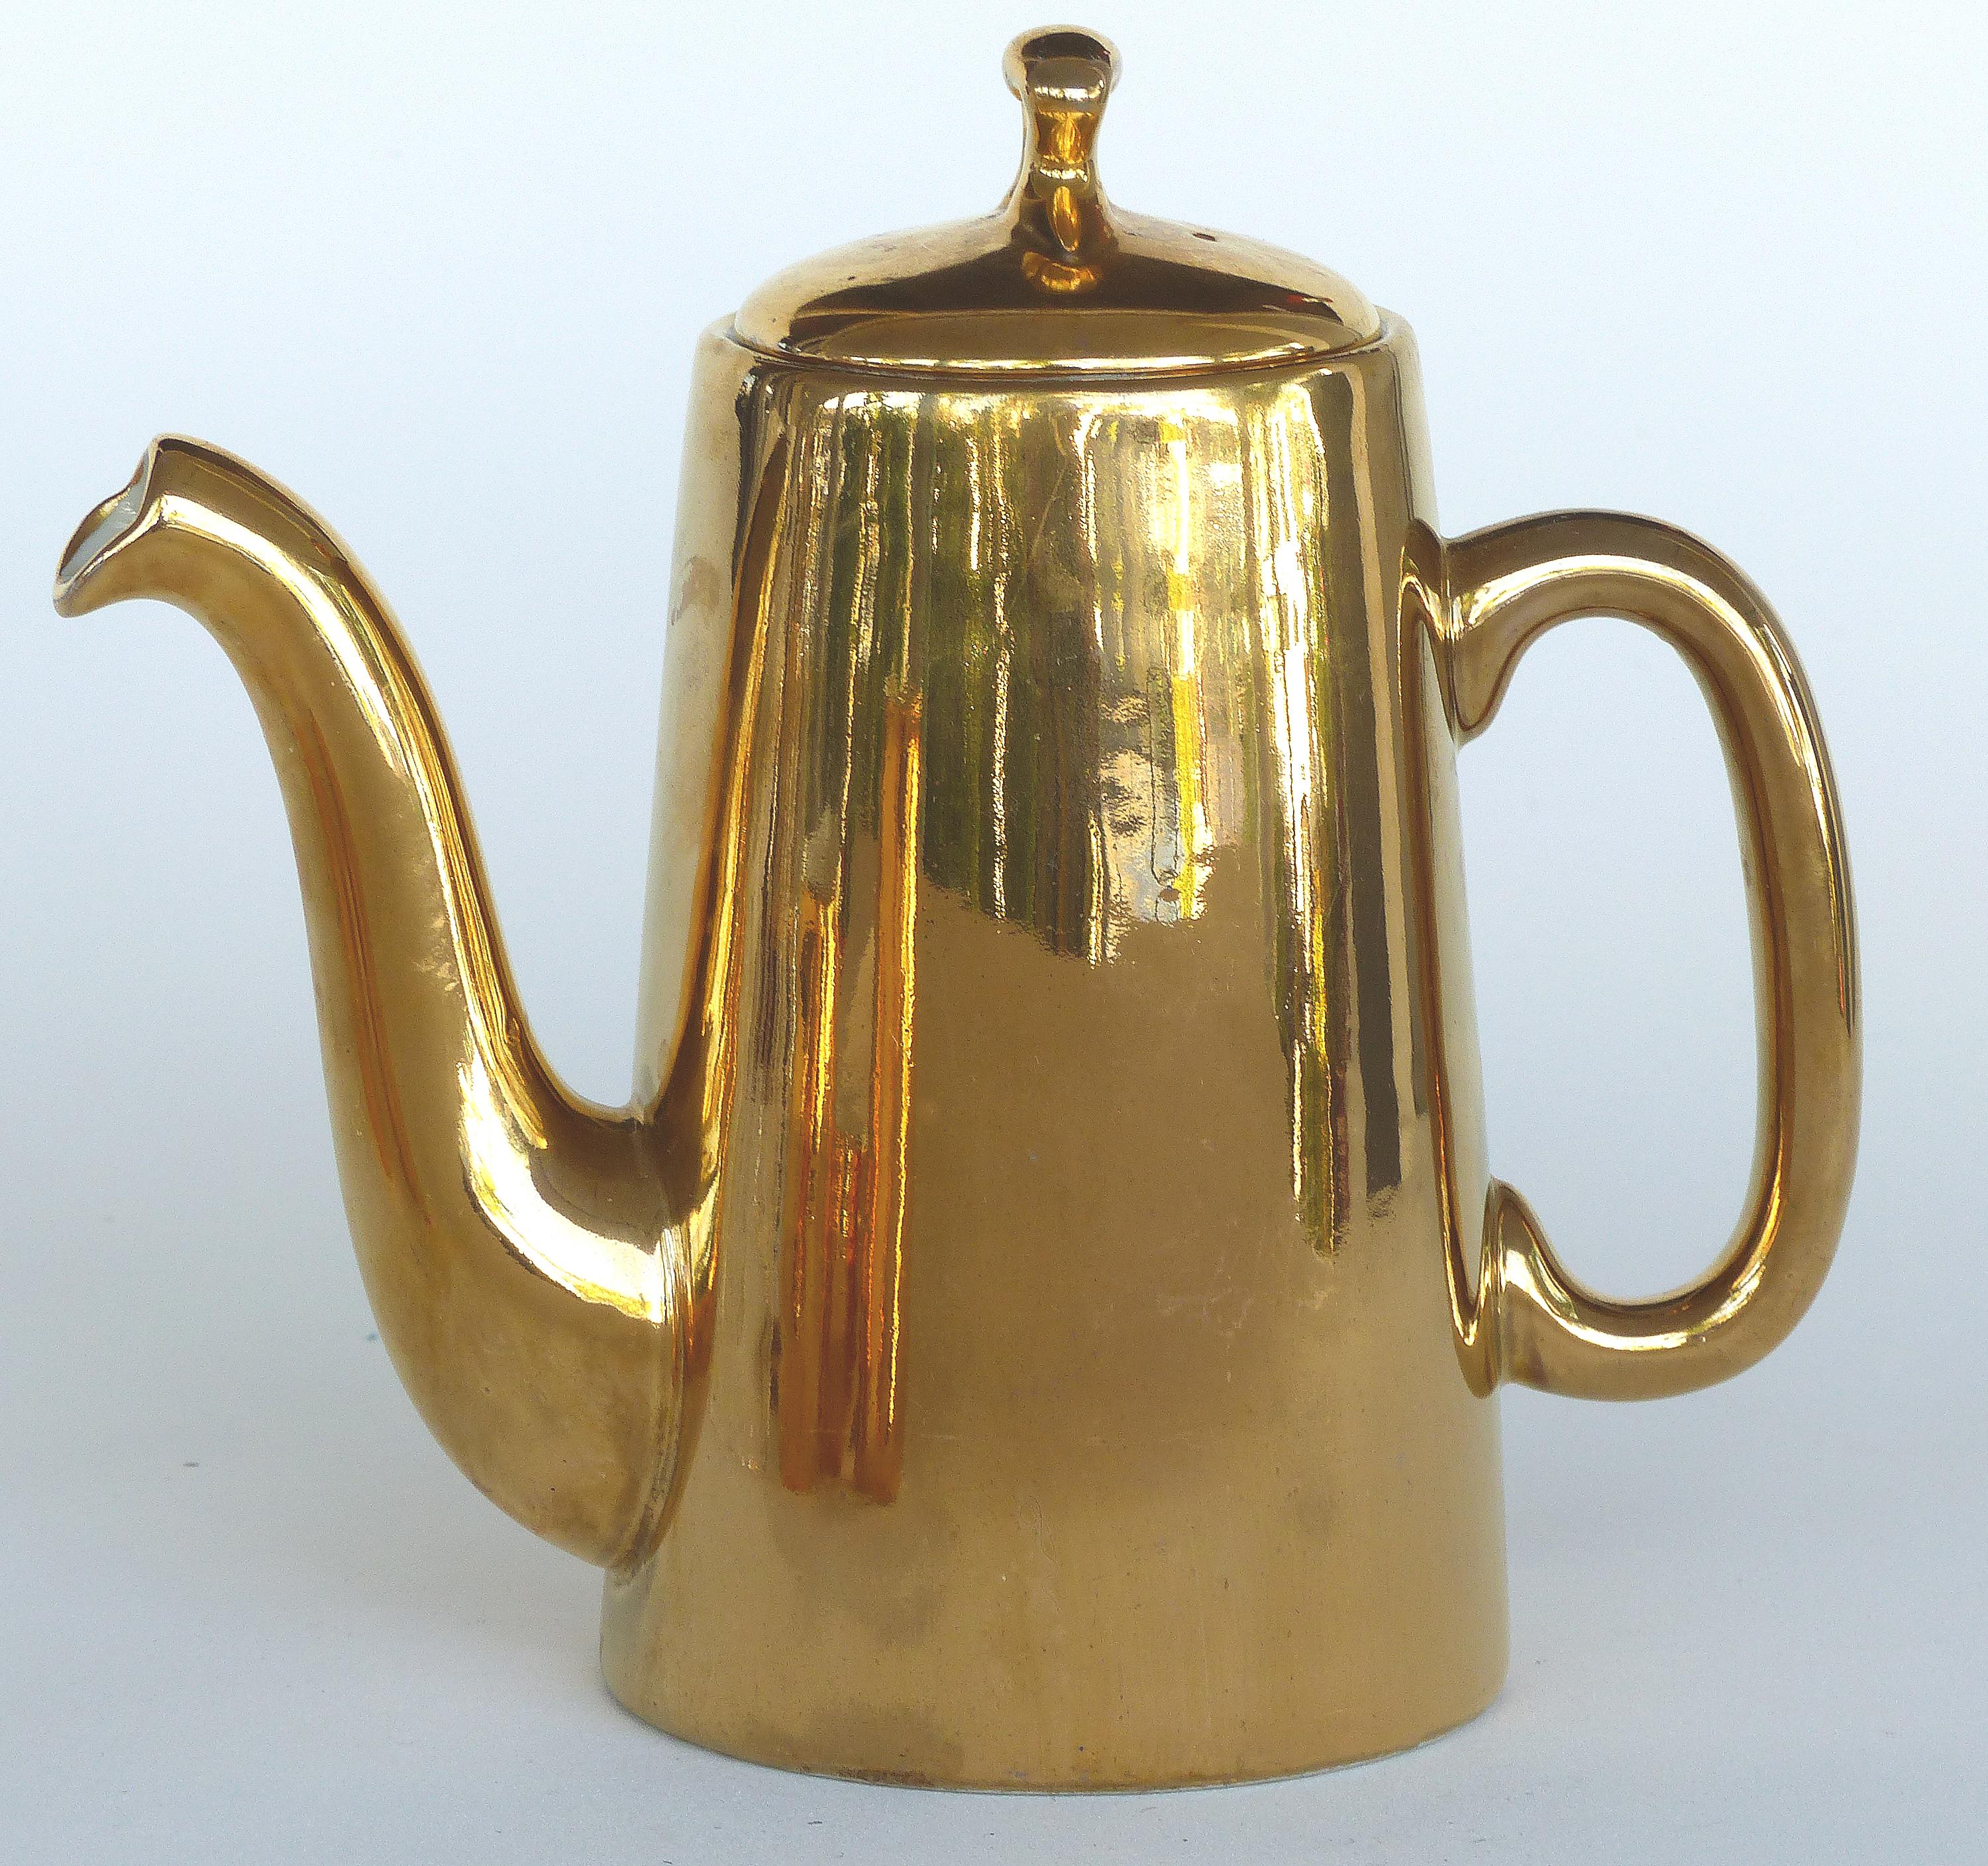 Mixed Gold Luster Coffee Set from Pillivuyt of France and Royal Worchester

Offered for sale is a mixed four piece gold luster-ware set including a coffee pot by Pillivuyt of France and three accompanying Royal Worchester pitchers and sugar bowl.